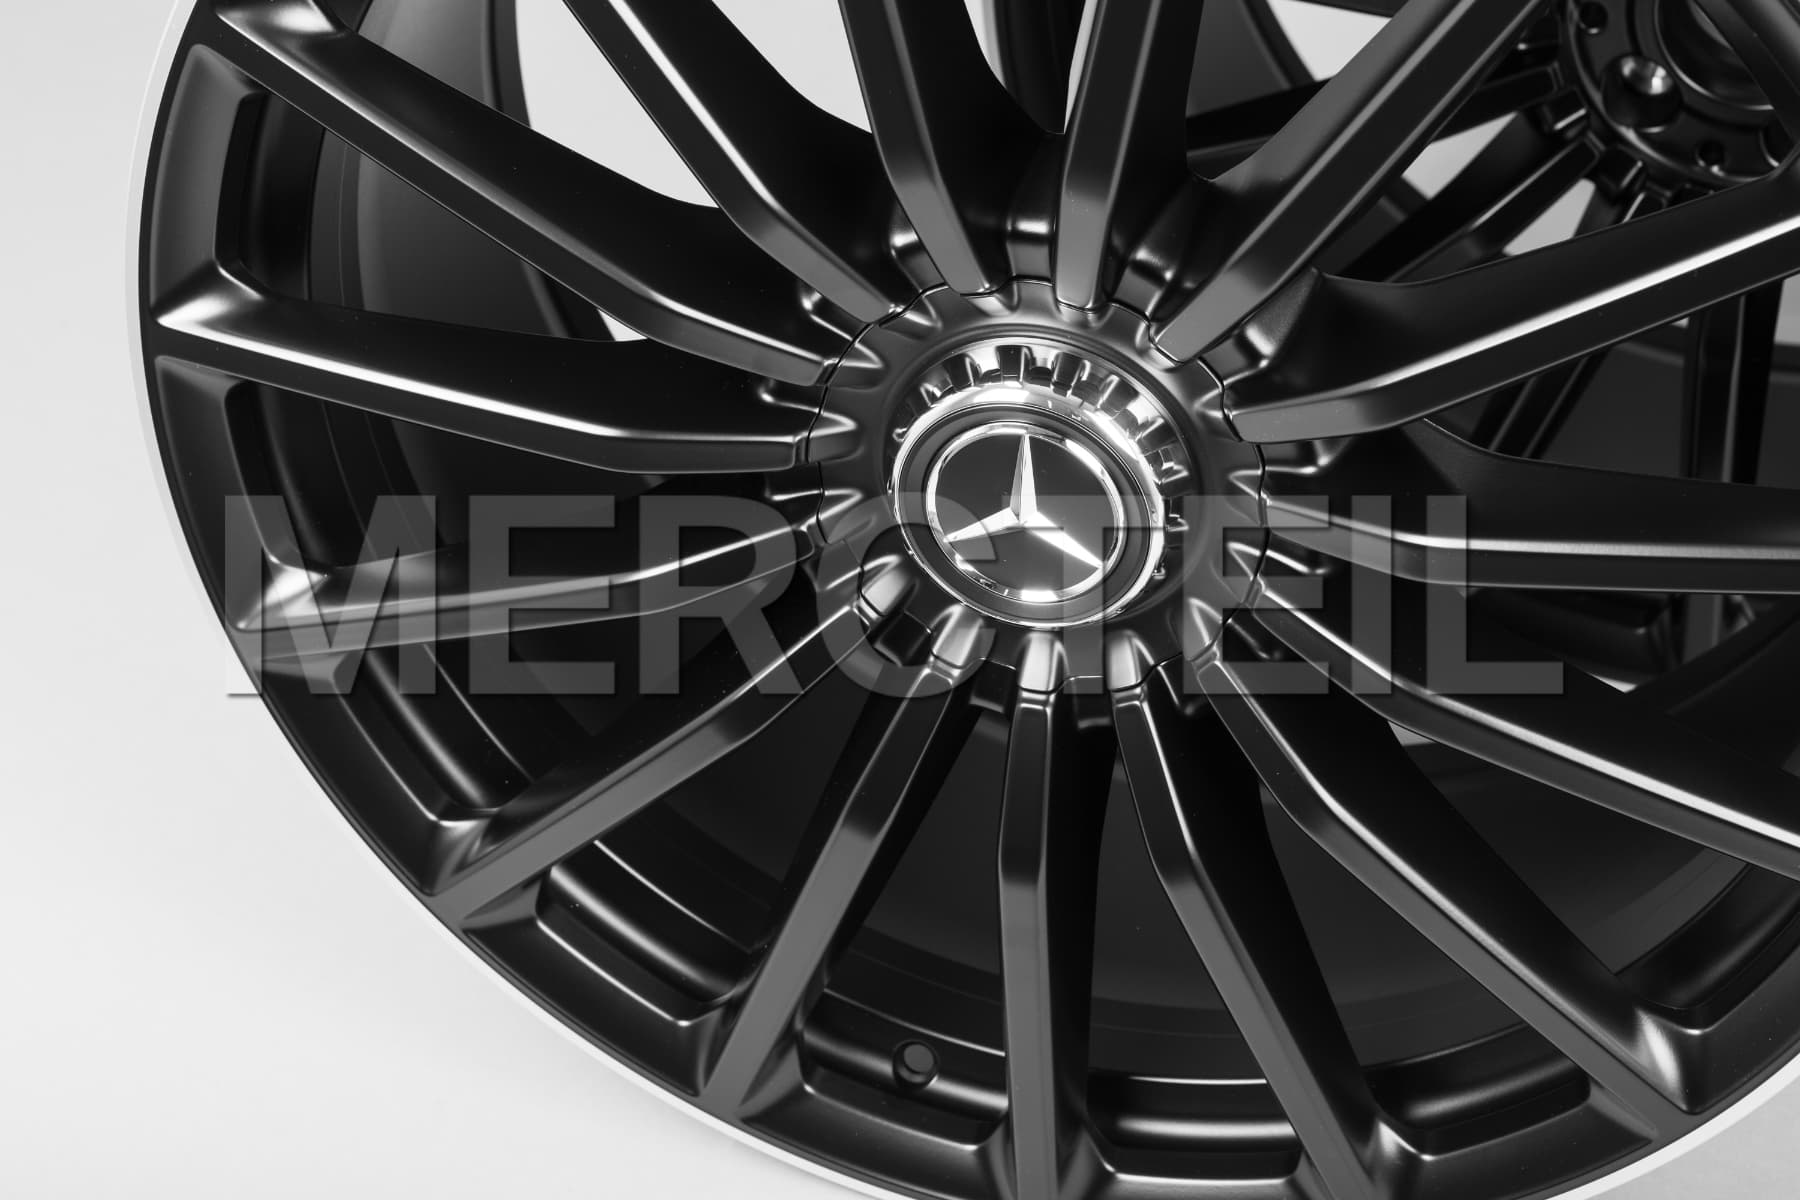 GLS Class AMG 15 Spoke Forged Wheels R22 X167 Genuine Mercedes AMG (part number: A16740183007X71)